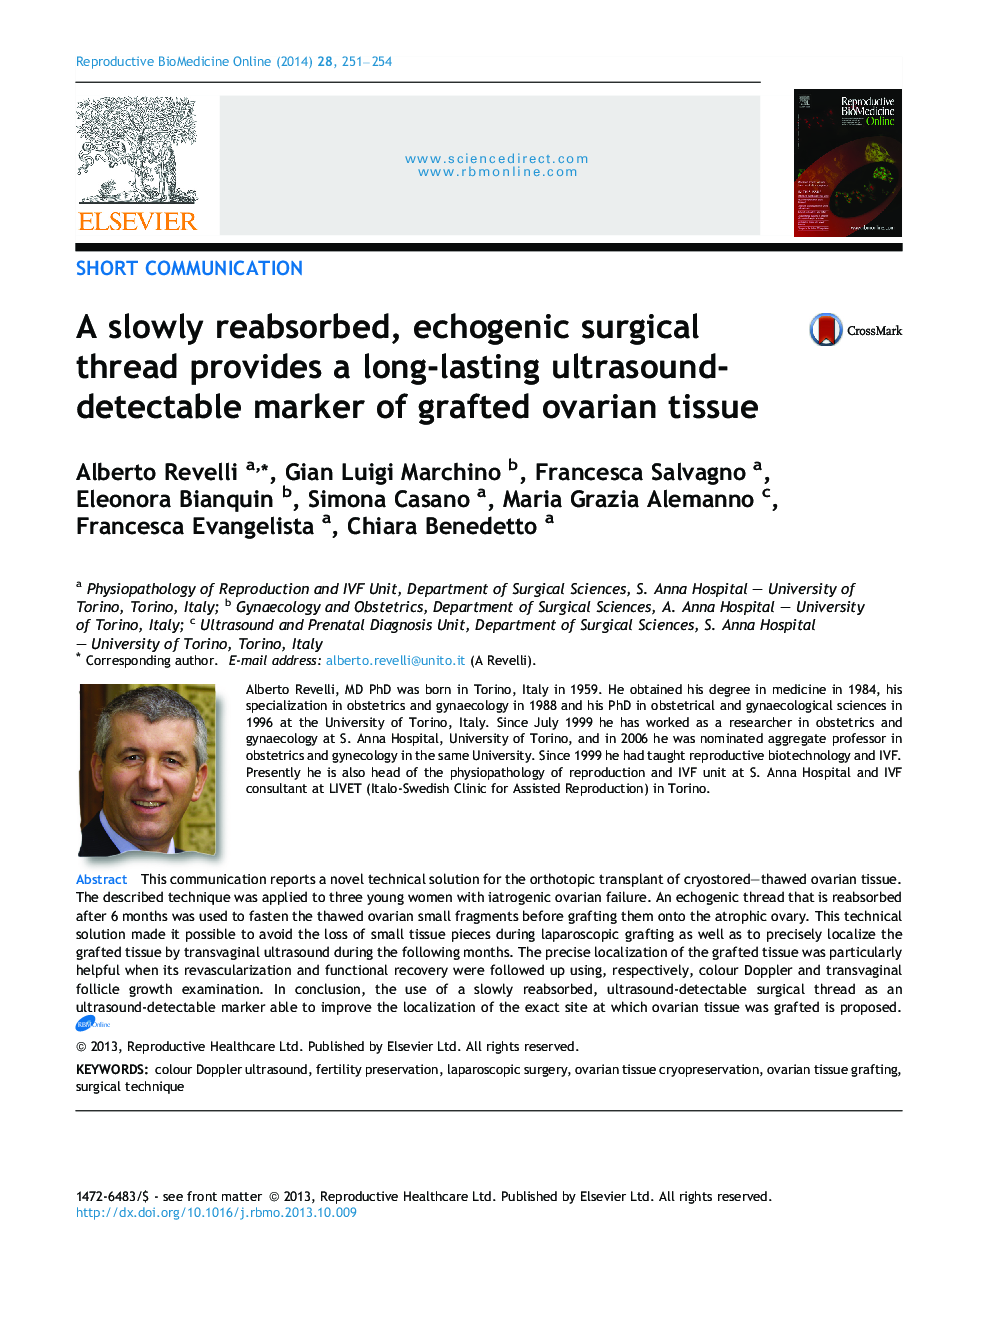 A slowly reabsorbed, echogenic surgical thread provides a long-lasting ultrasound-detectable marker of grafted ovarian tissue 